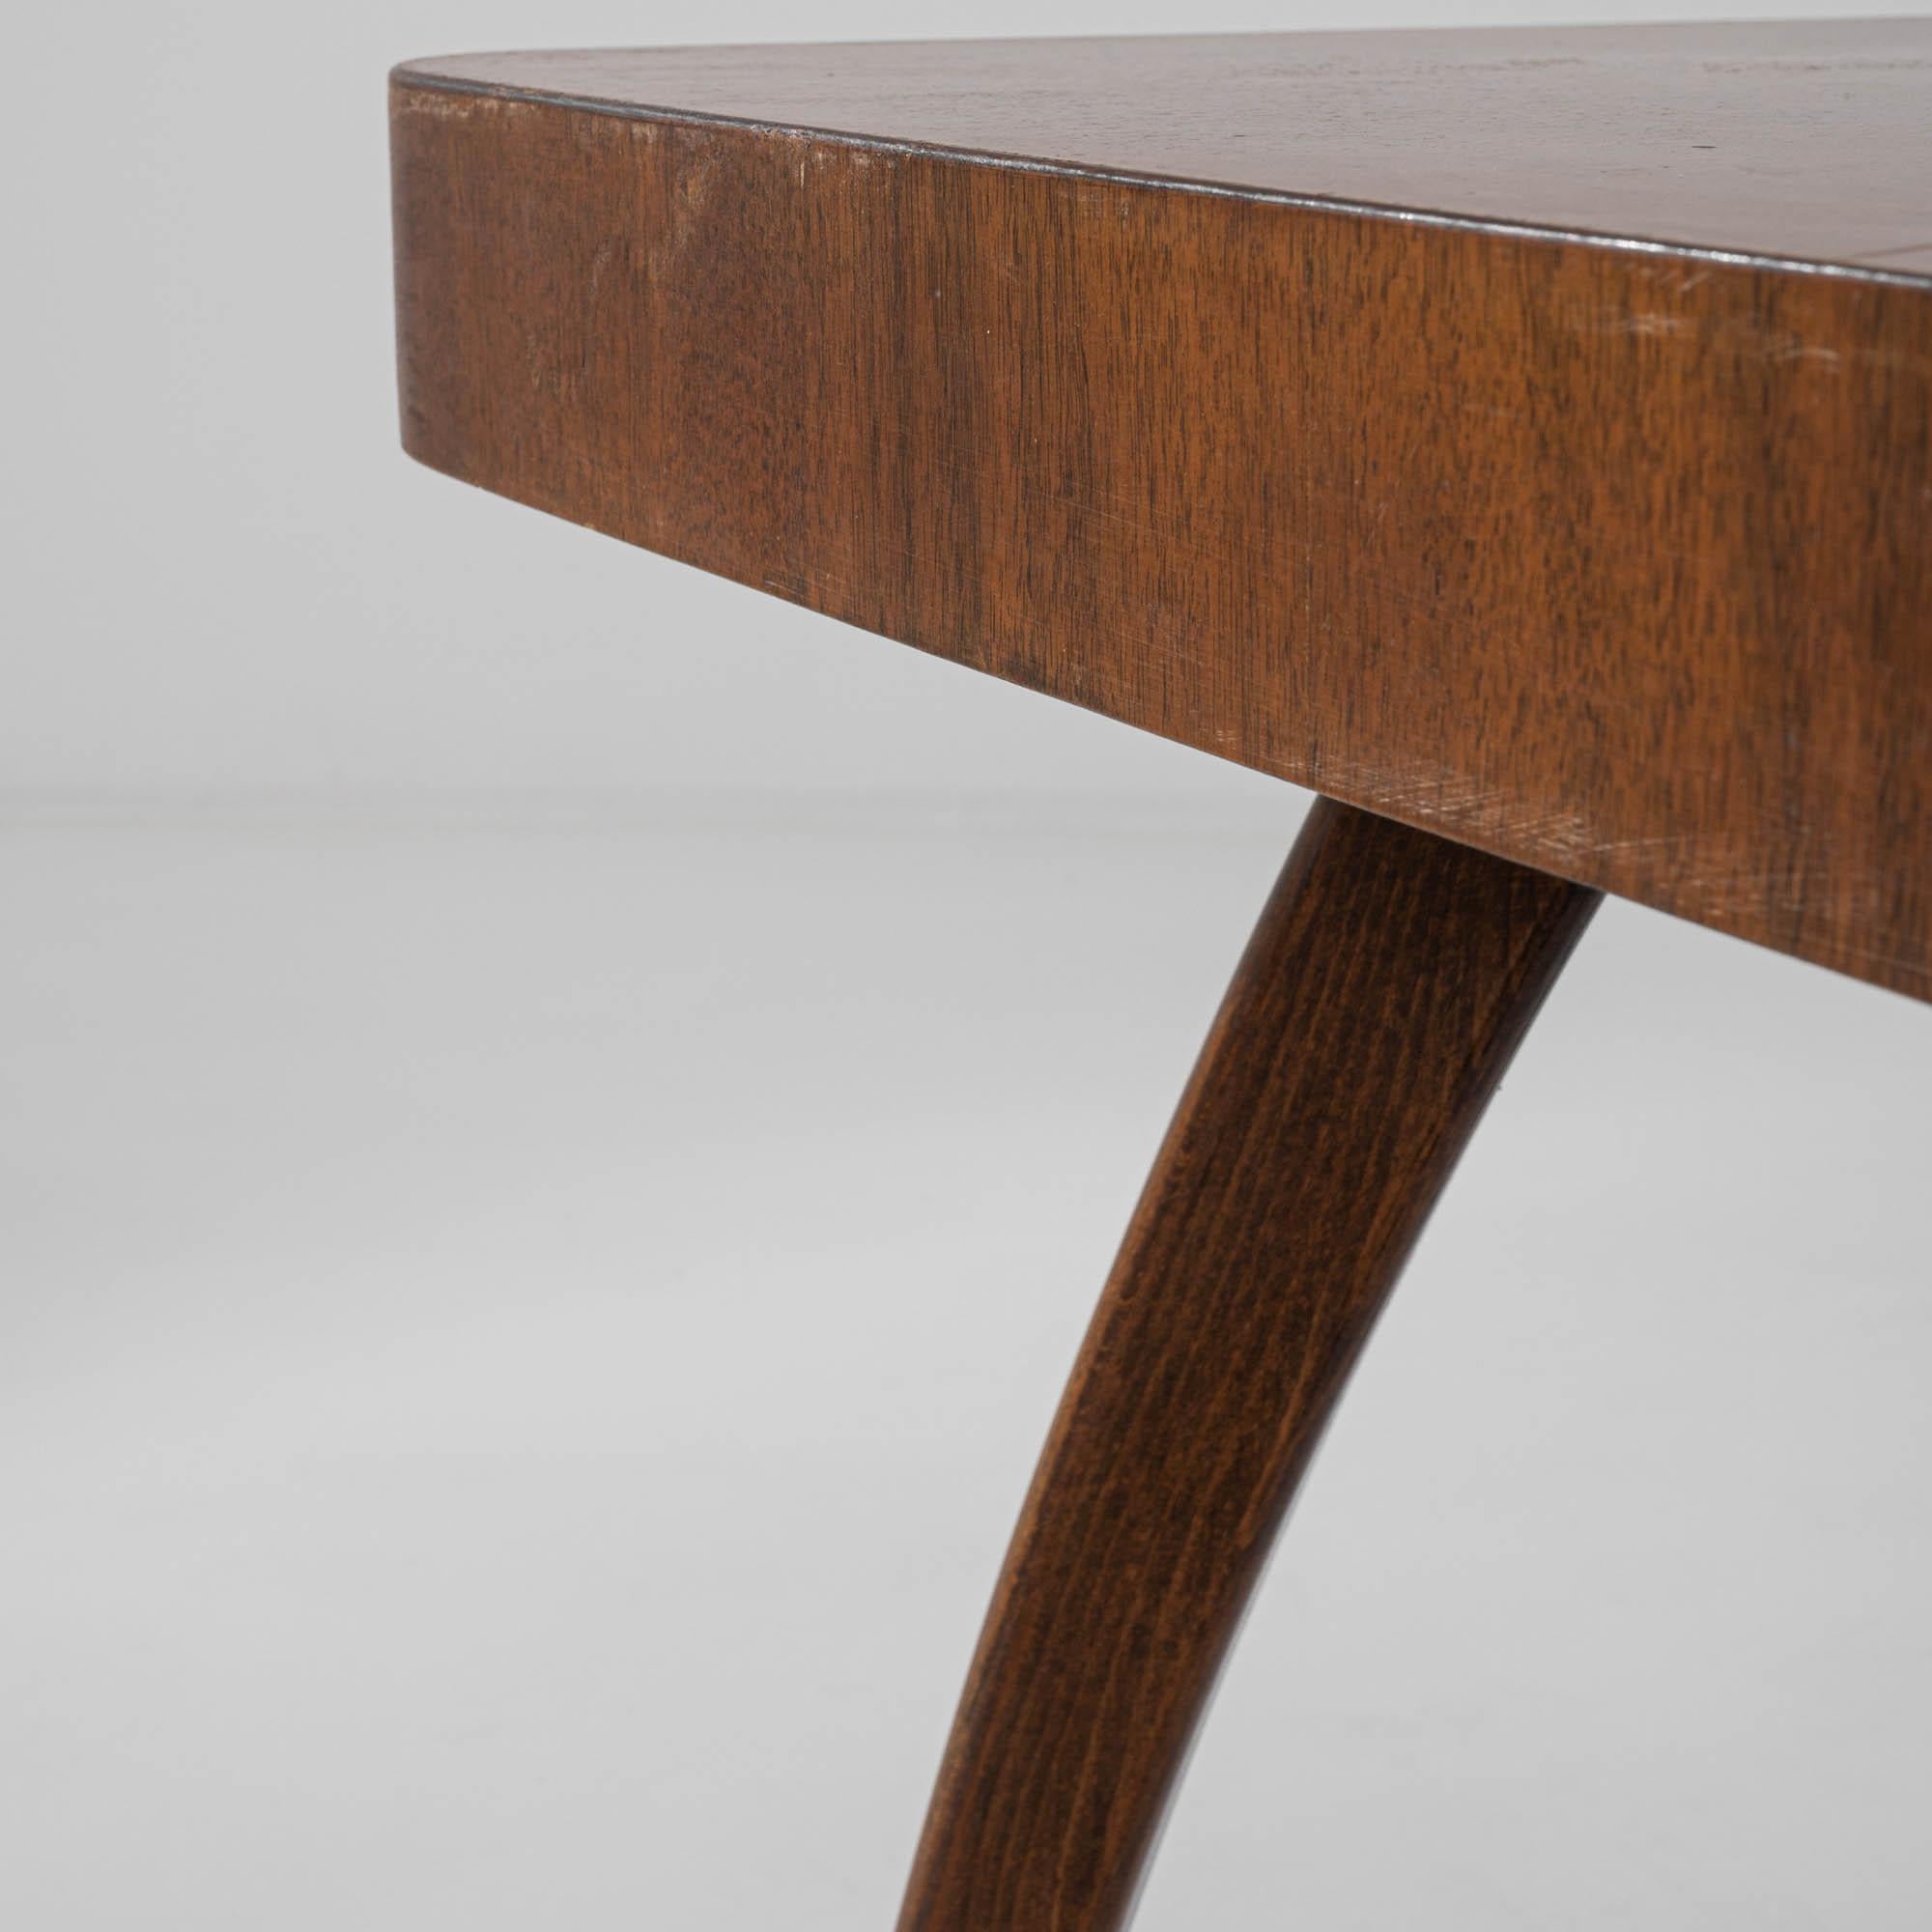 Bentwood H259 Spider Table by Jindrich Halabala